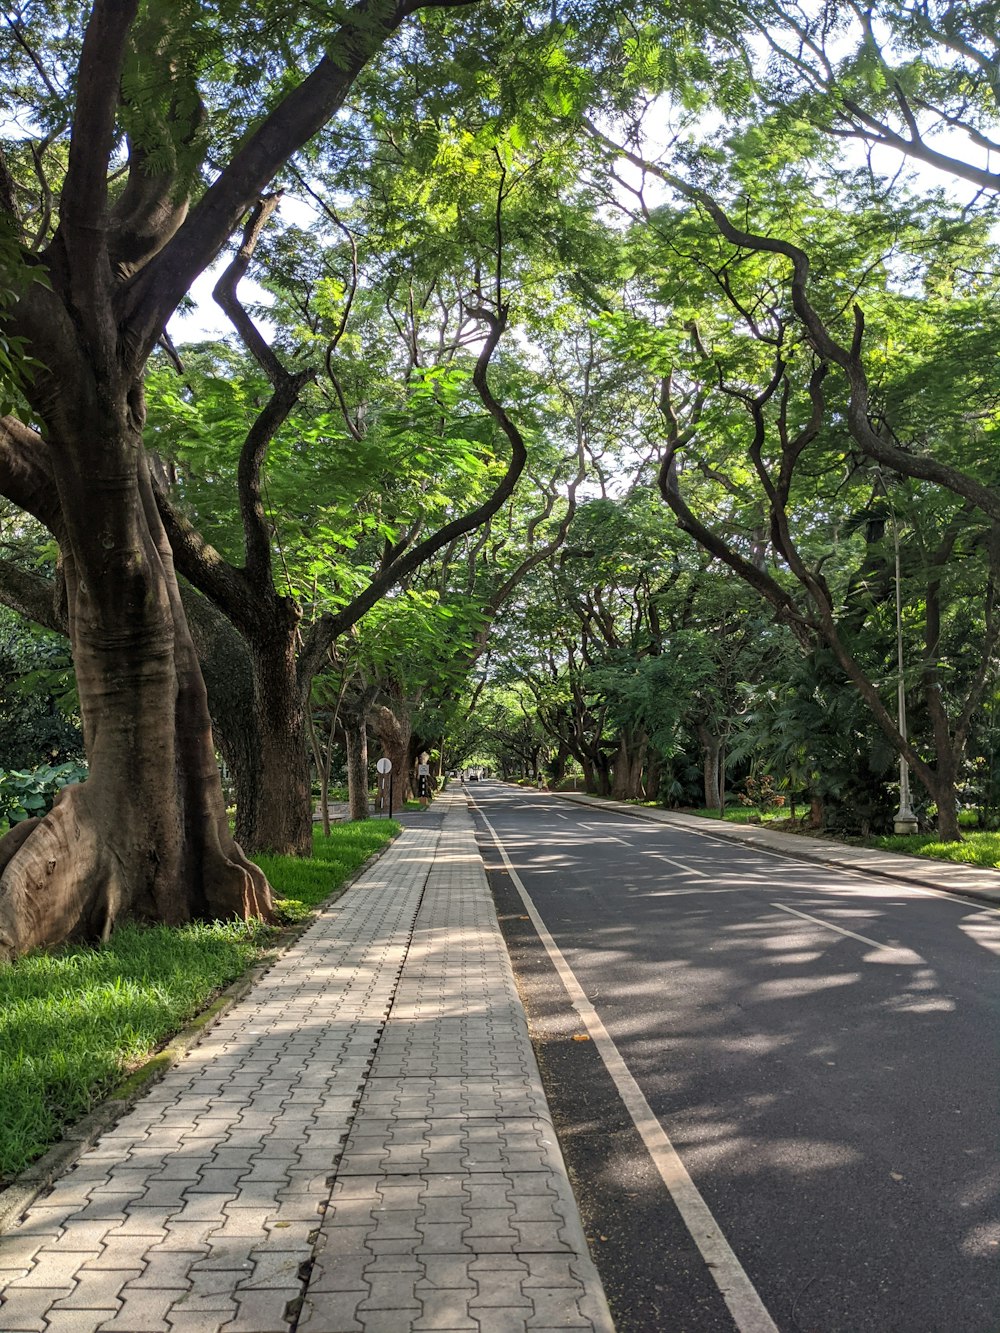 a street lined with trees and grass next to a sidewalk